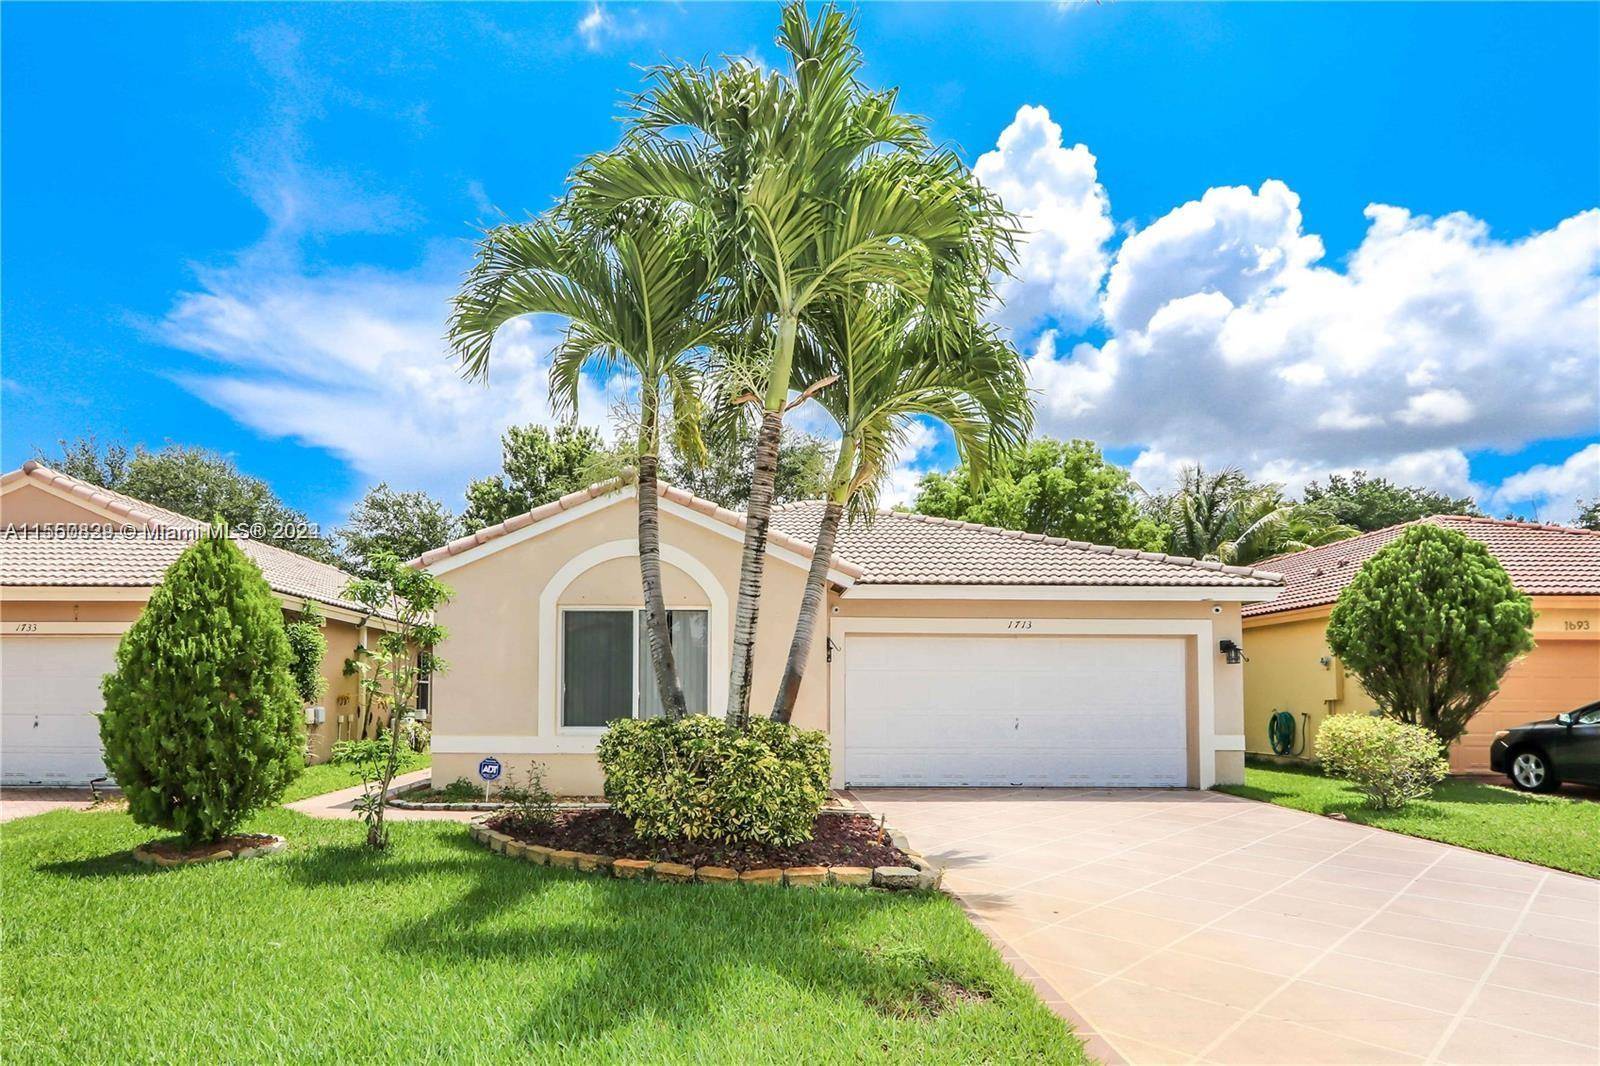 Welcome to your future home in Pembroke Pines, FL.